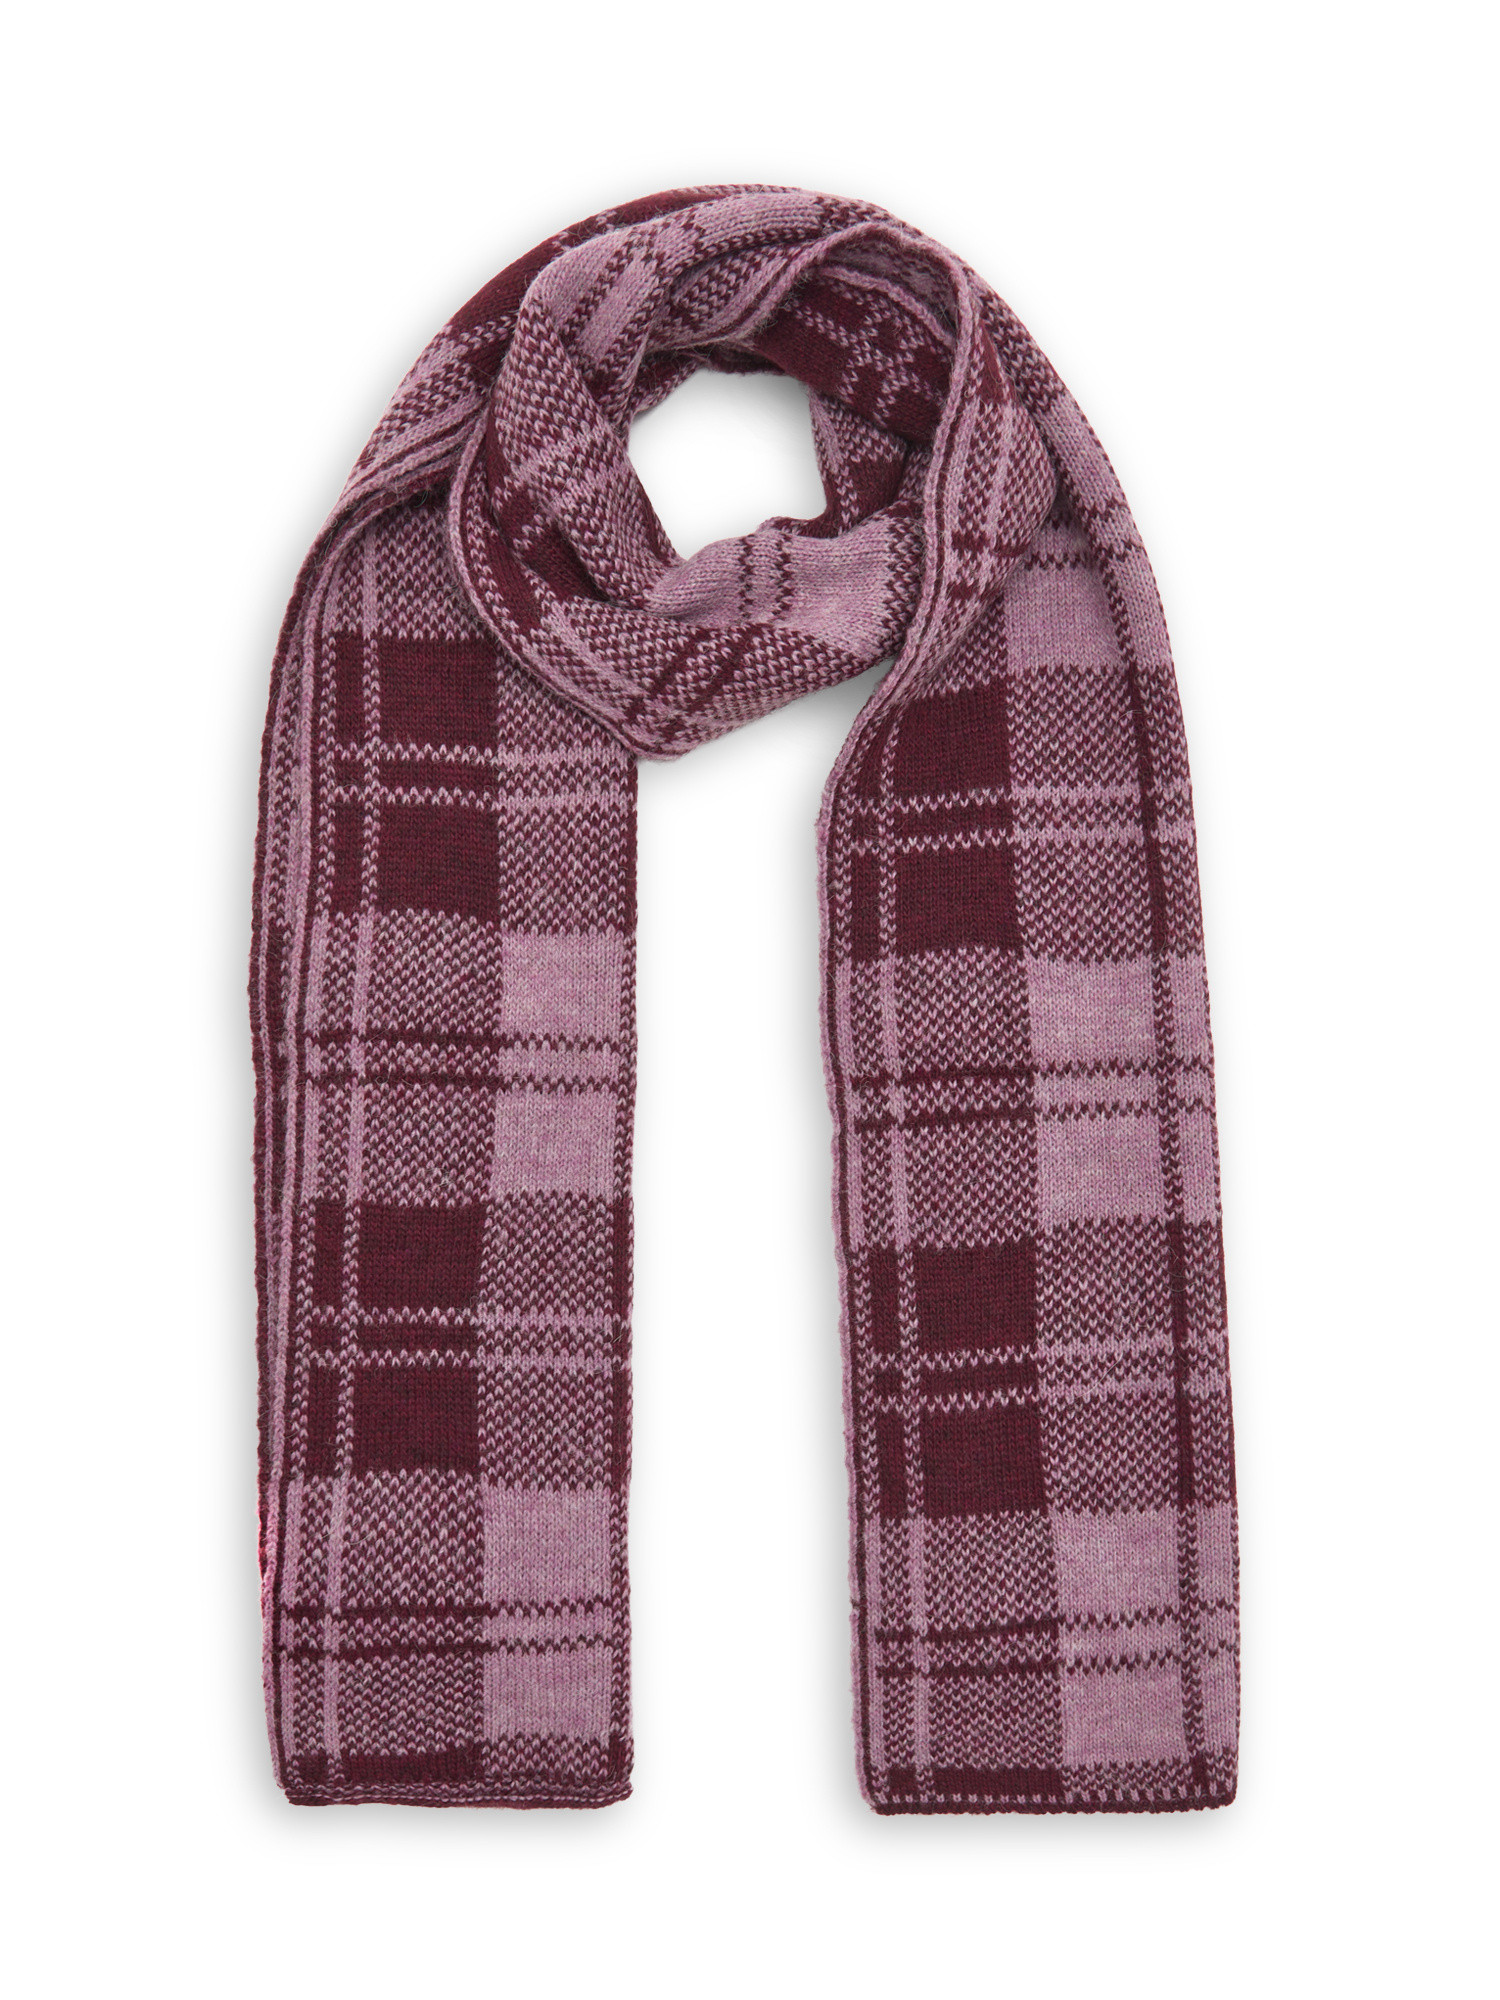 Koan - Tartan checked knitted scarf, Pink, large image number 0